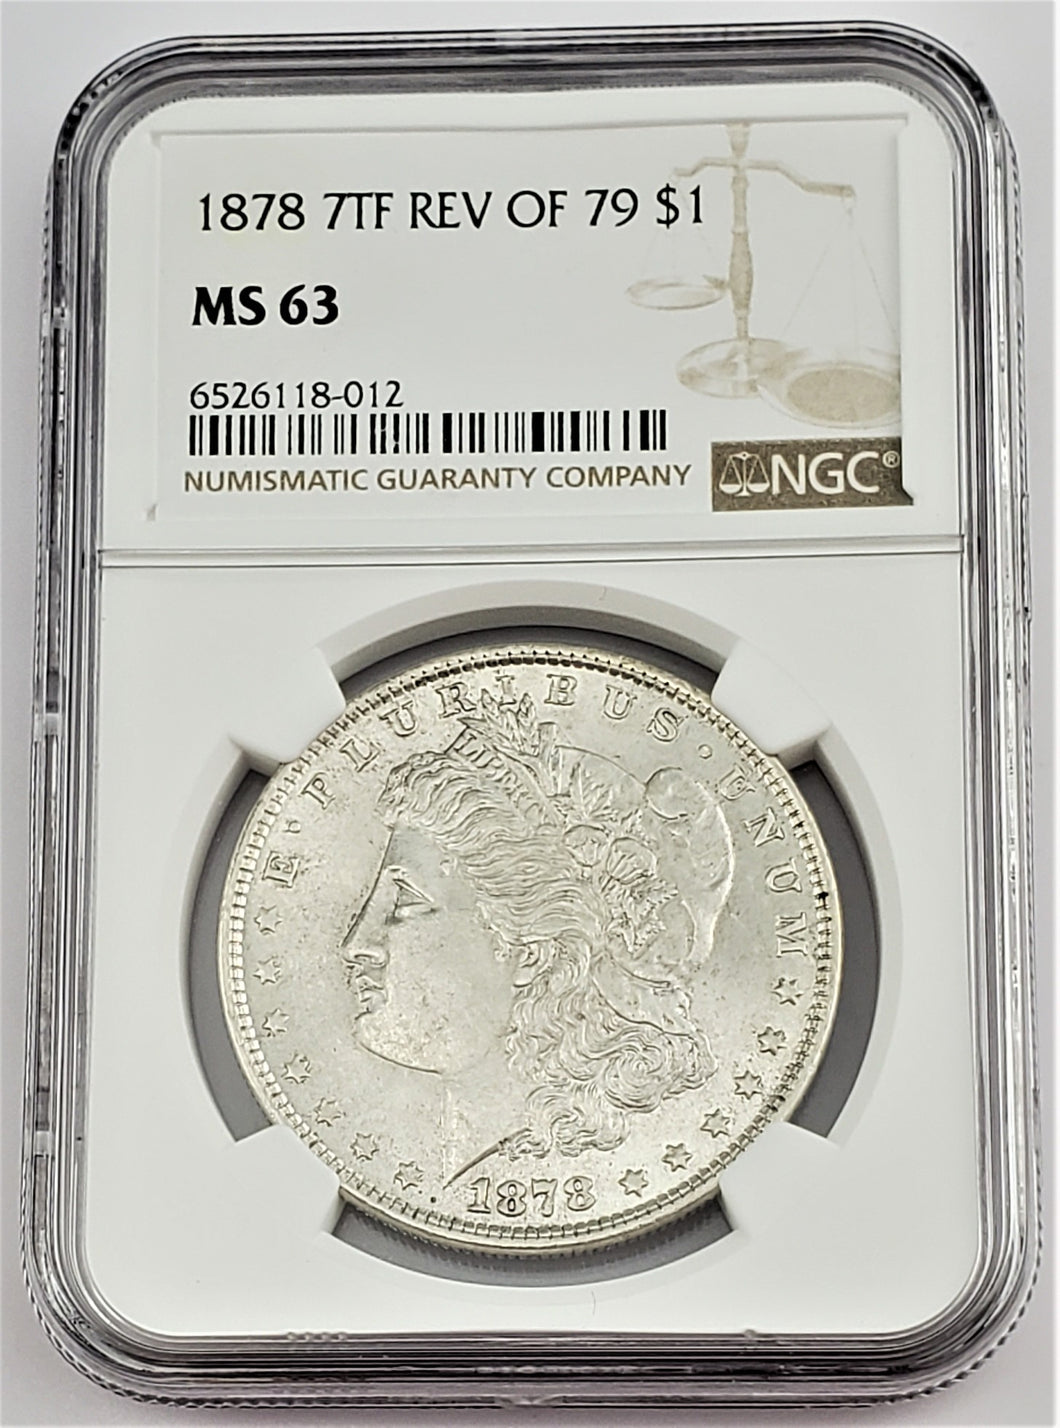 1878 P 7 Tail Feather Reverse of 79 Morgan Silver Dollar $1 NGC MS 63